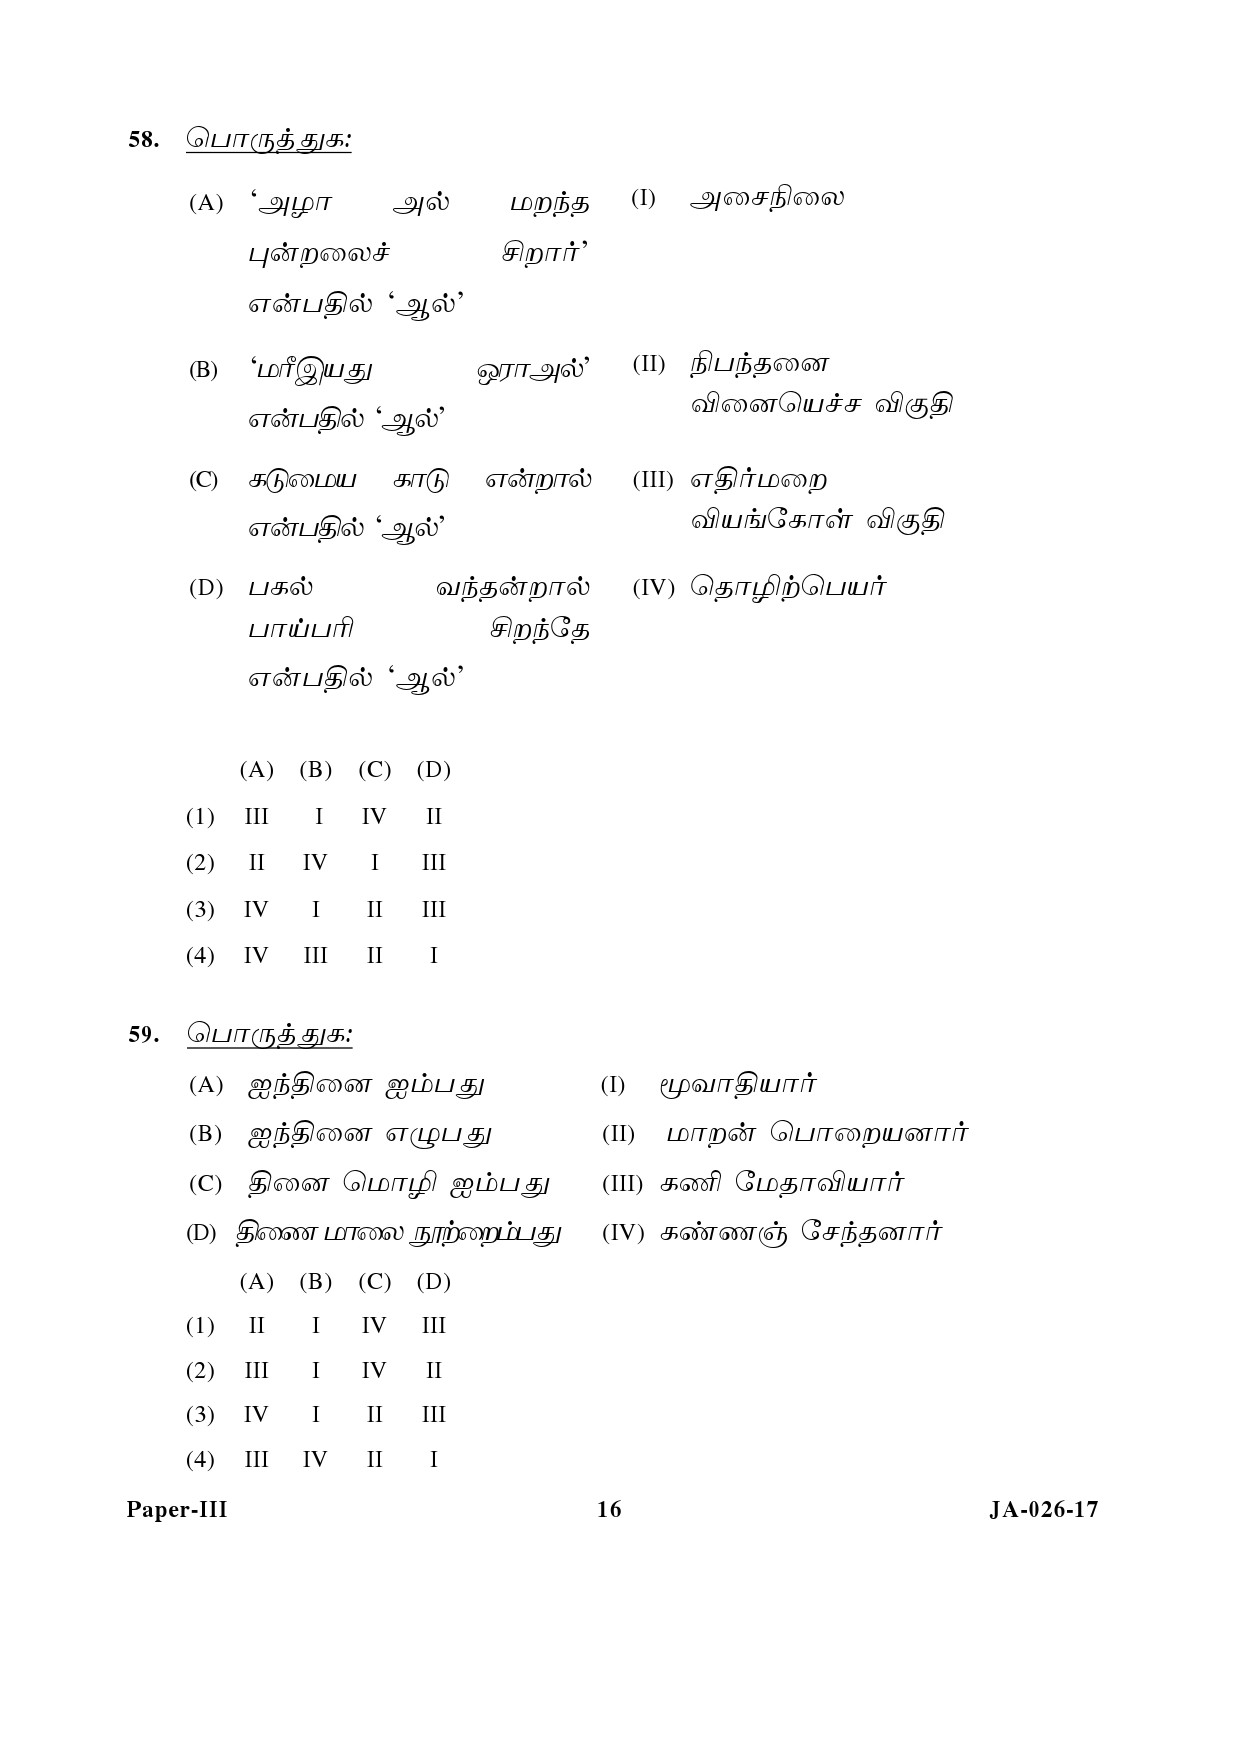 Tamil Question Paper III January 2017-UGC NET Previous Question Papers